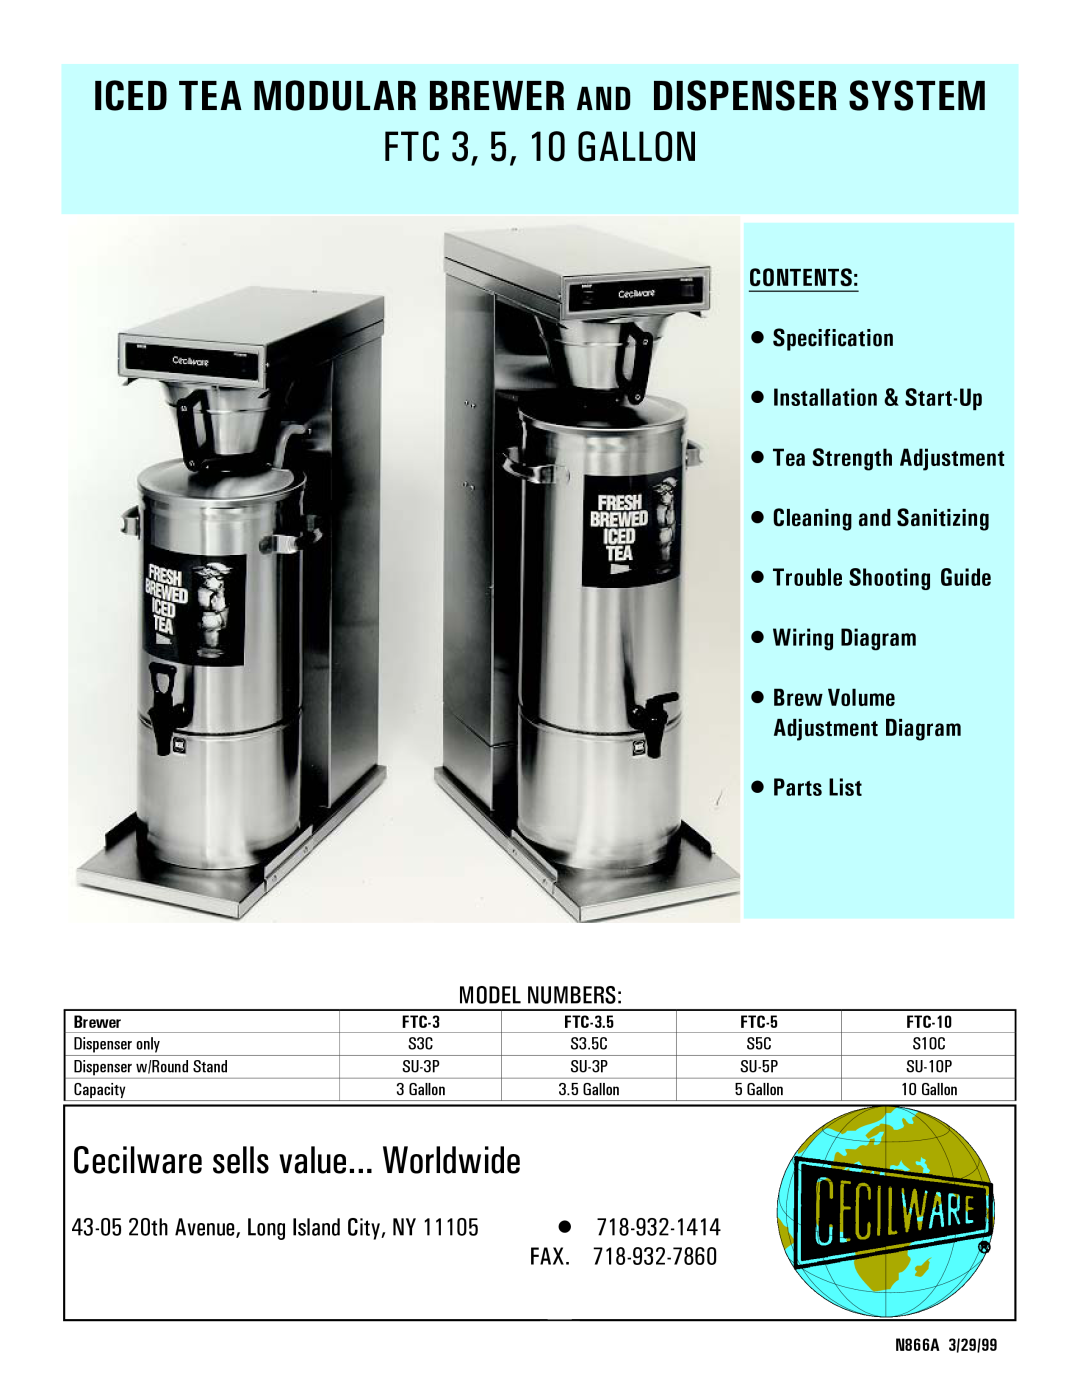 Cecilware FTC-10 manual CONTENTS Specification, Installation & Start-Up, Tea Strength Adjustment, Cleaning and Sanitizing 